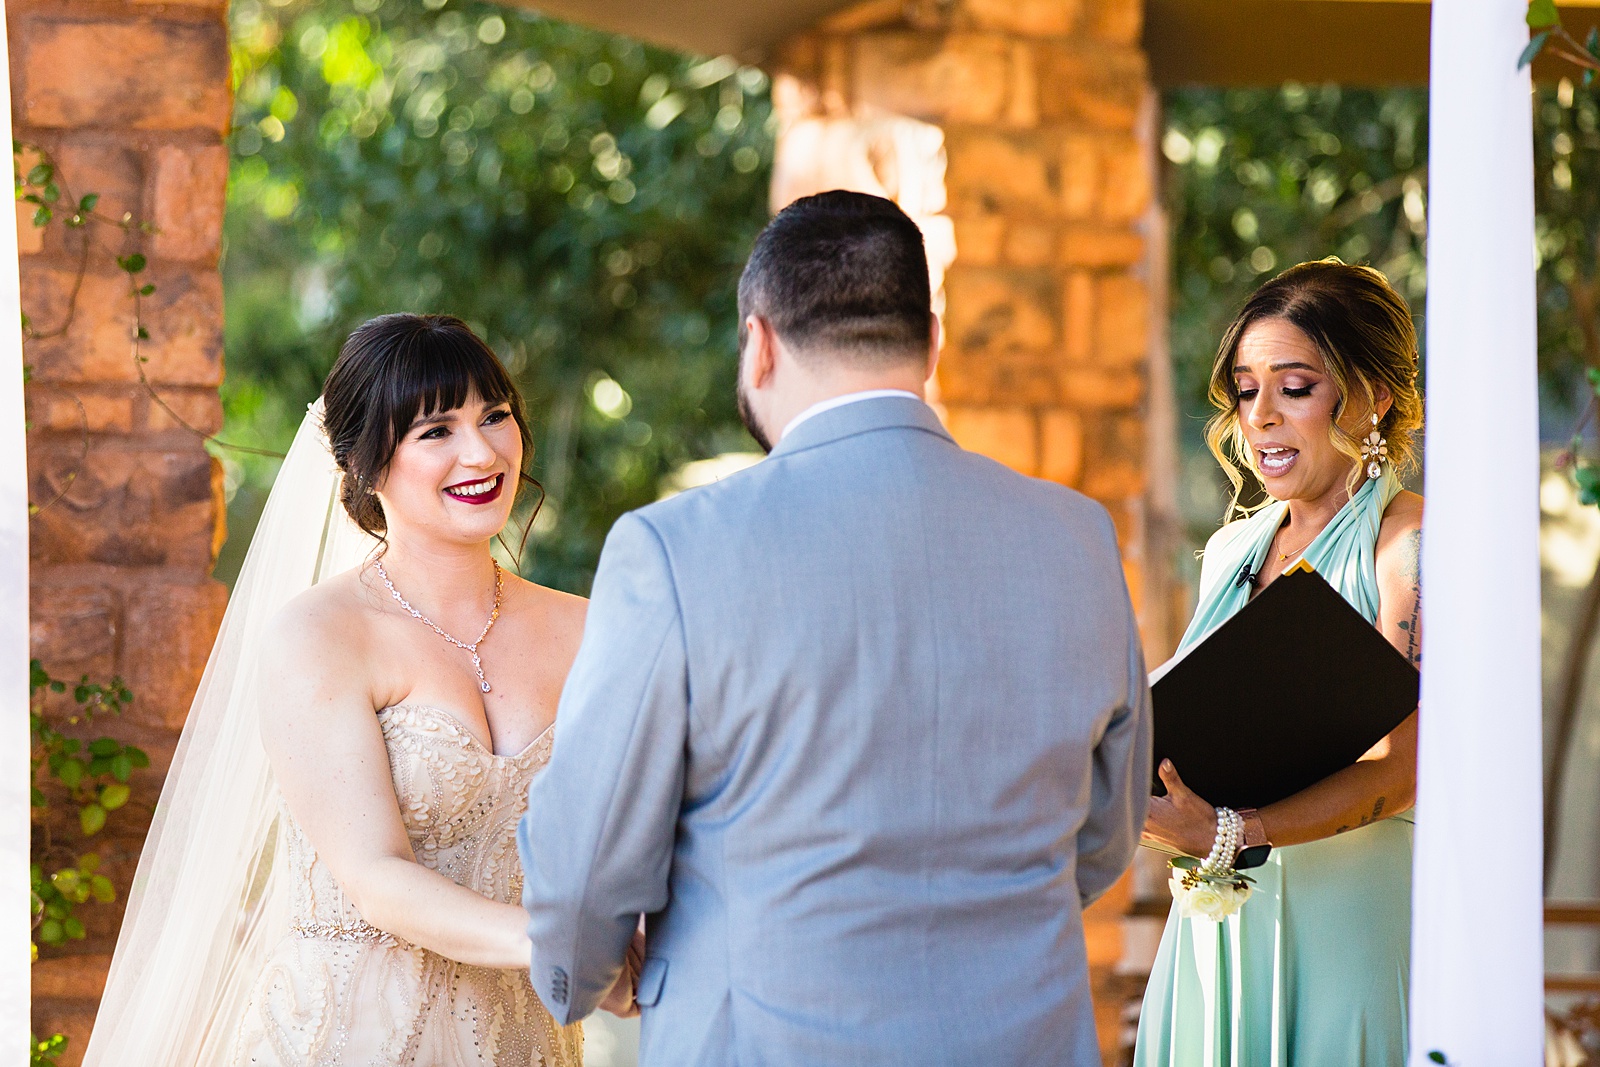 Bride looking at her groom during their wedding ceremony at Bella Rose Estate by Chandler wedding photographer PMA Photography.